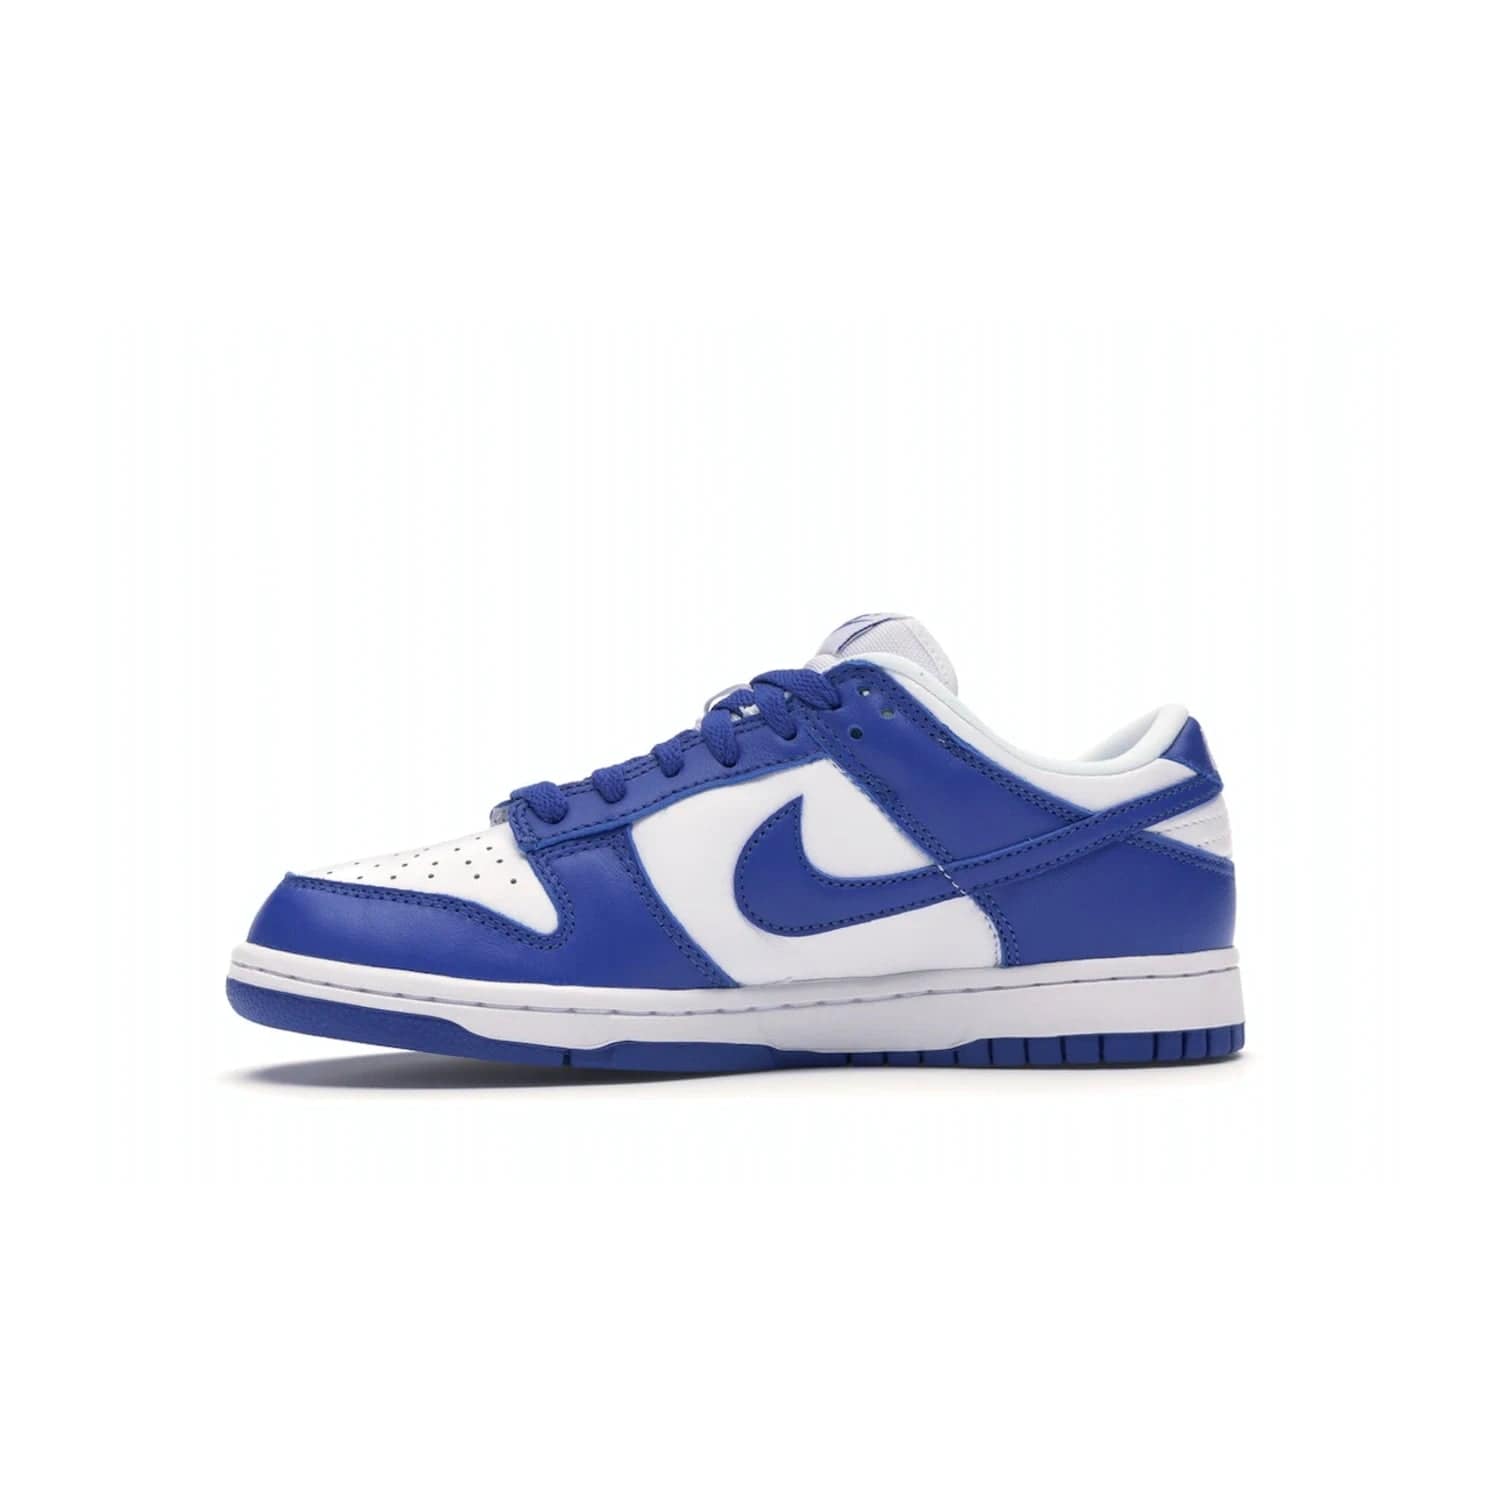 Nike Dunk Low SP Kentucky (2020/2022) - Image 18 - Only at www.BallersClubKickz.com - Classic Nike Dunk Low SP Kentucky with timeless White/Varsity Royal colorway. White leather upper, royal outsole, and Nike branding. A hit since March 2020 homage to the 1985 Nike College Colors program. Show your support with these classic kicks.